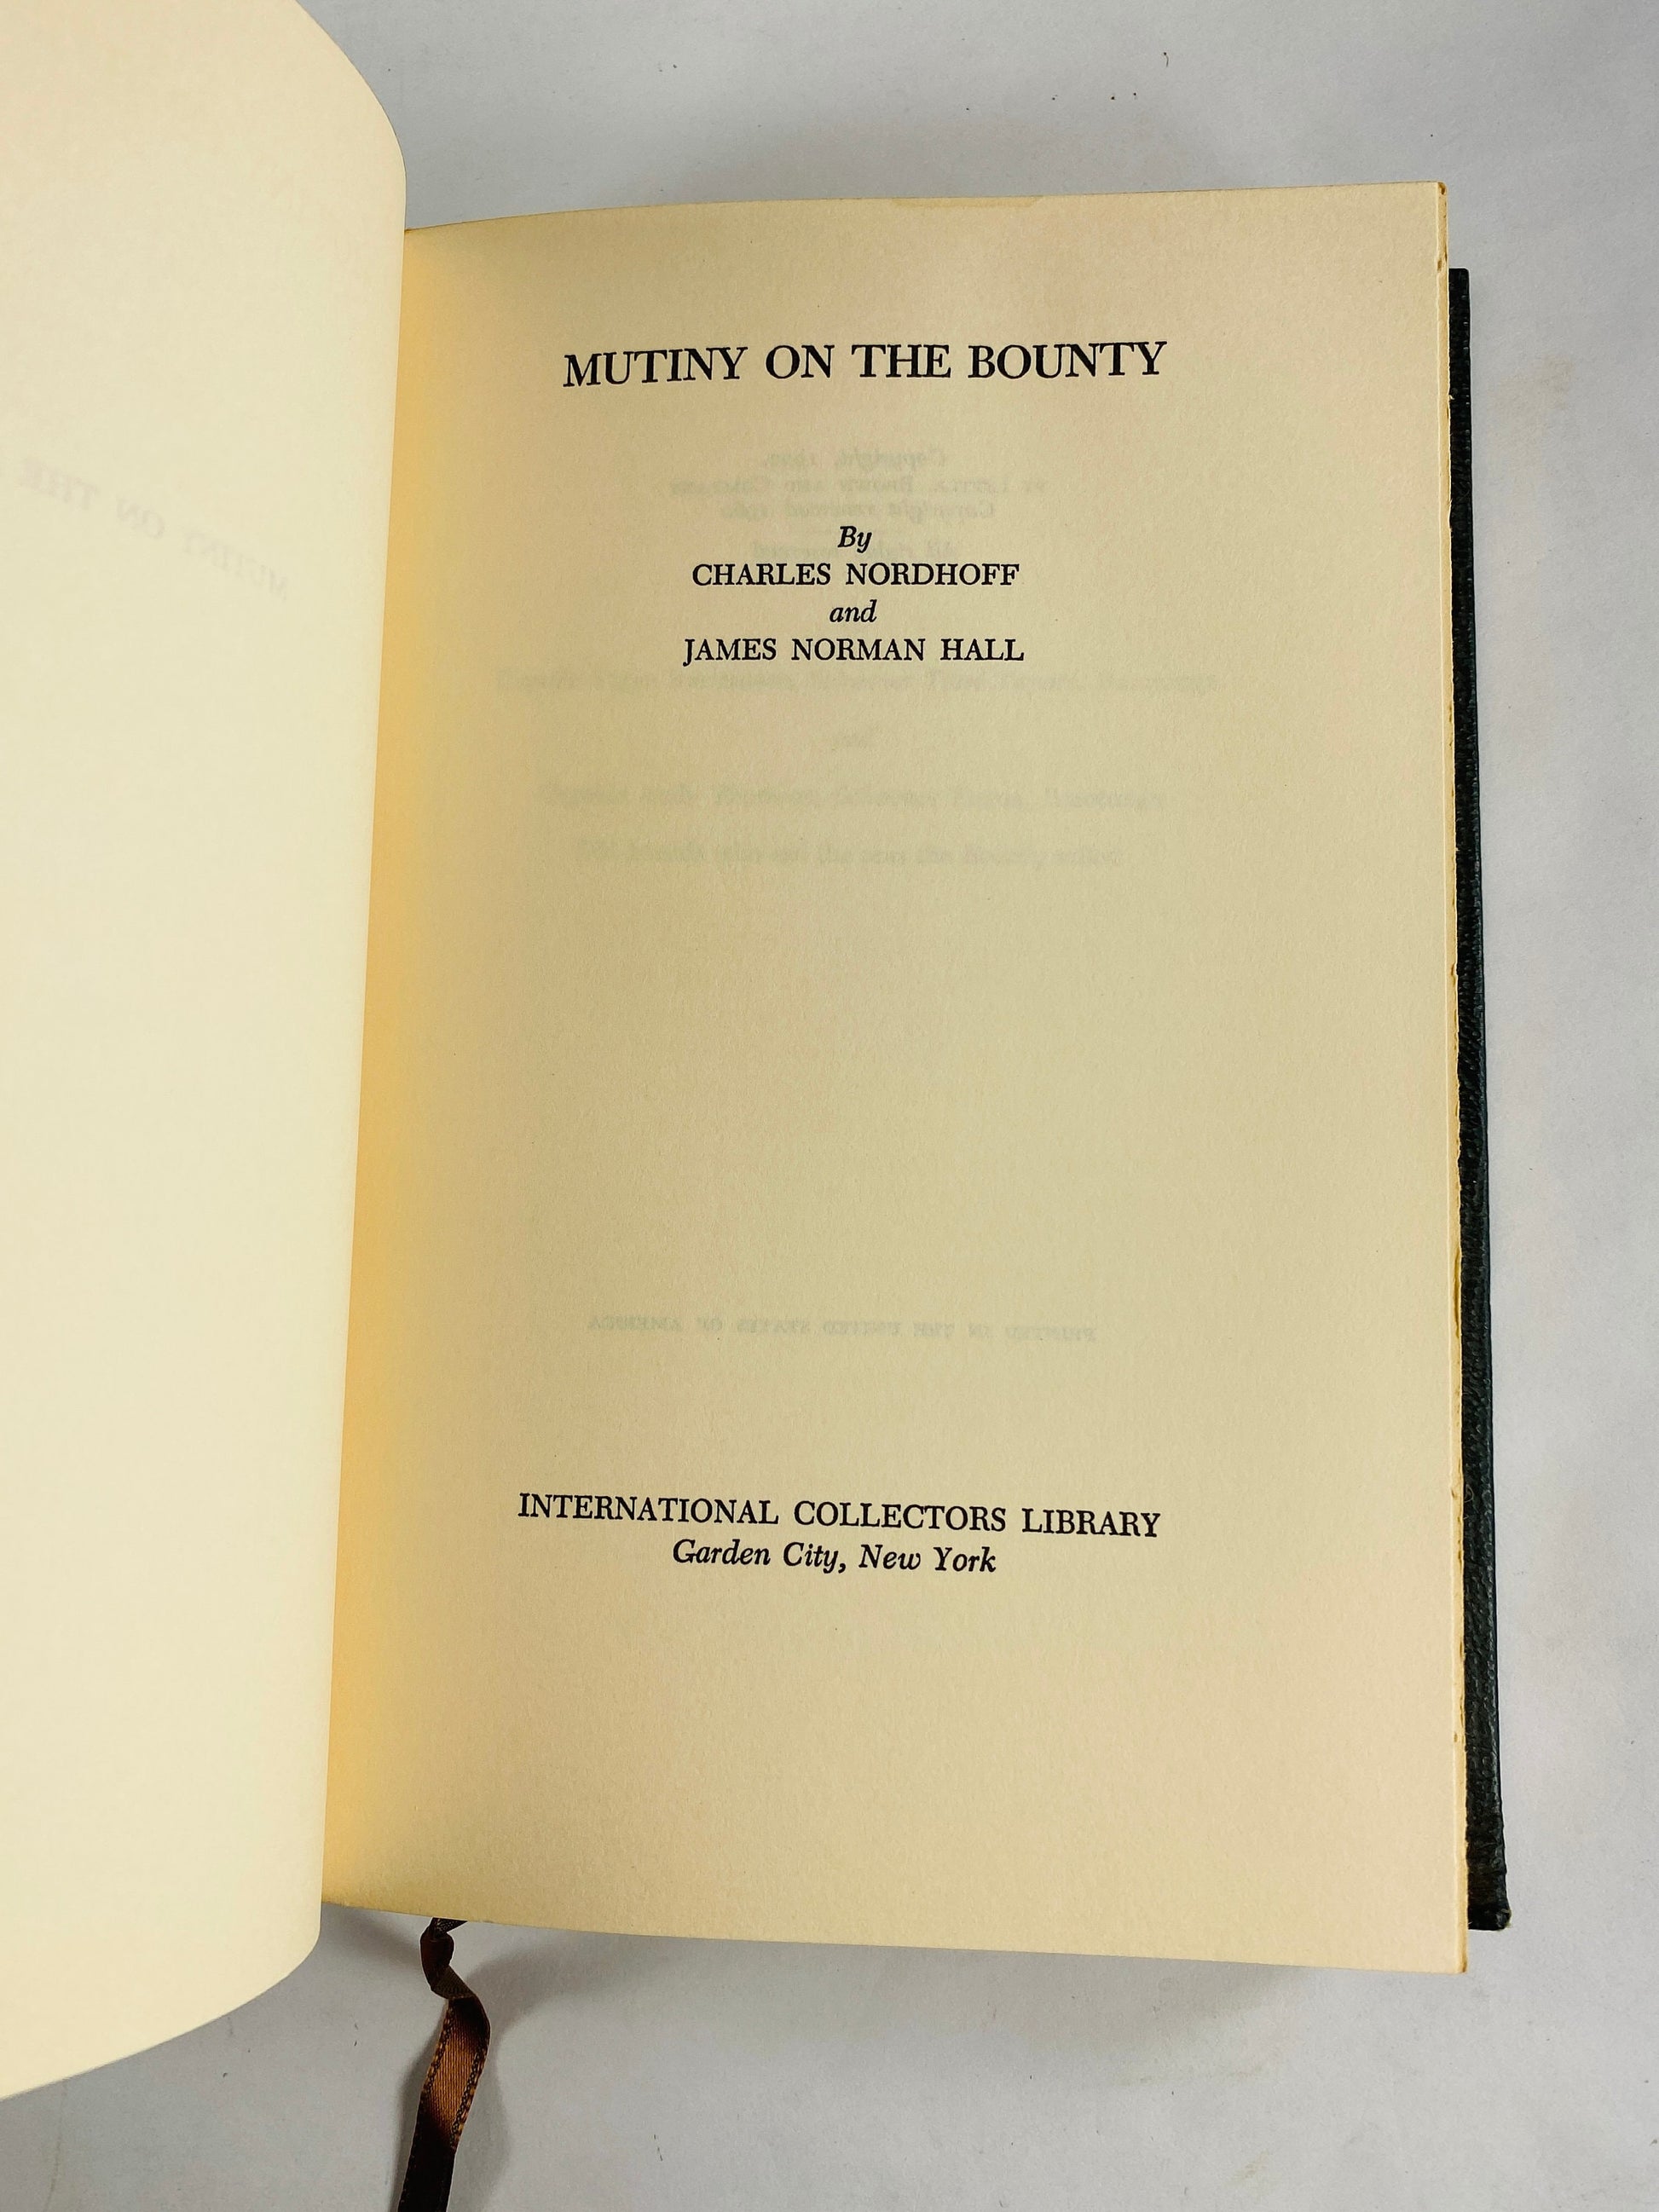 Mutiny on the Bounty vintage green leatherette book by Charles Nordhoff and James Norman Hall circa 1969. Father's Day gift bookshelf decor